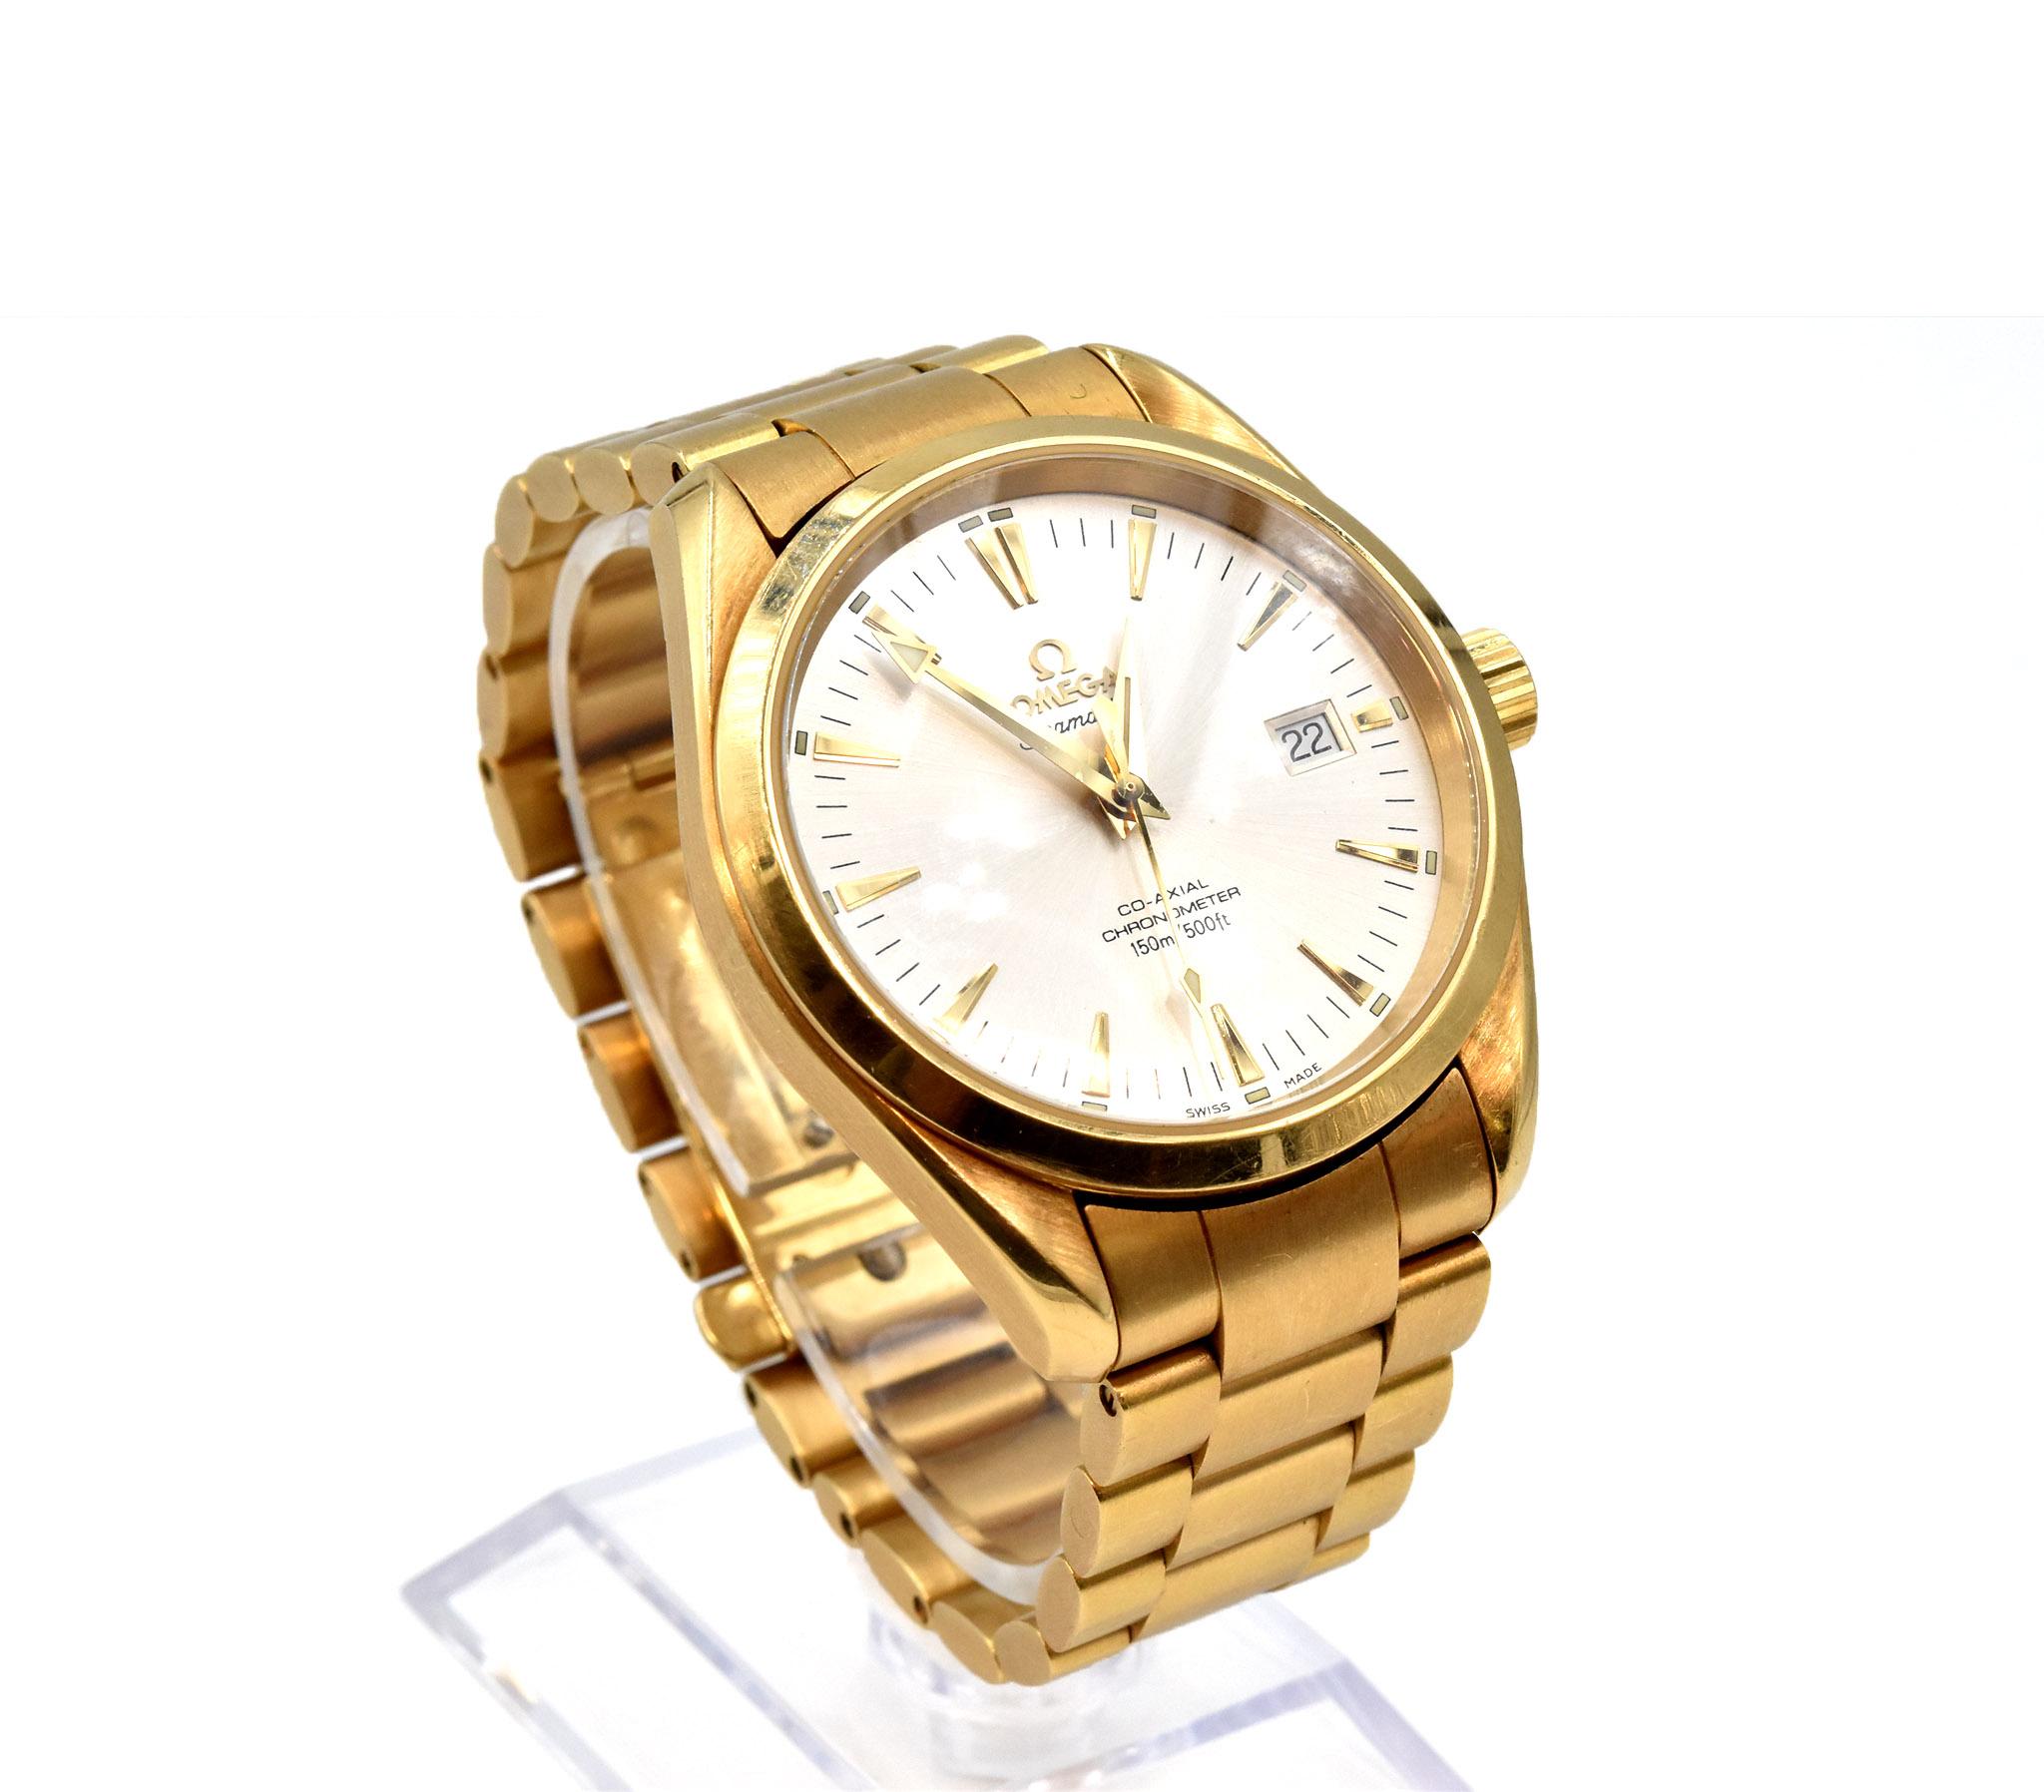 Movement: automatic
Function: hours, minutes, sub-seconds
Case: 42mm 18k yellow gold case, sapphire protective crystal, screw-down crown, water resistant to 150 meters
Band: 18k yellow gold bracelet with folding clasp, bracelet fit for 7 1/2-inch